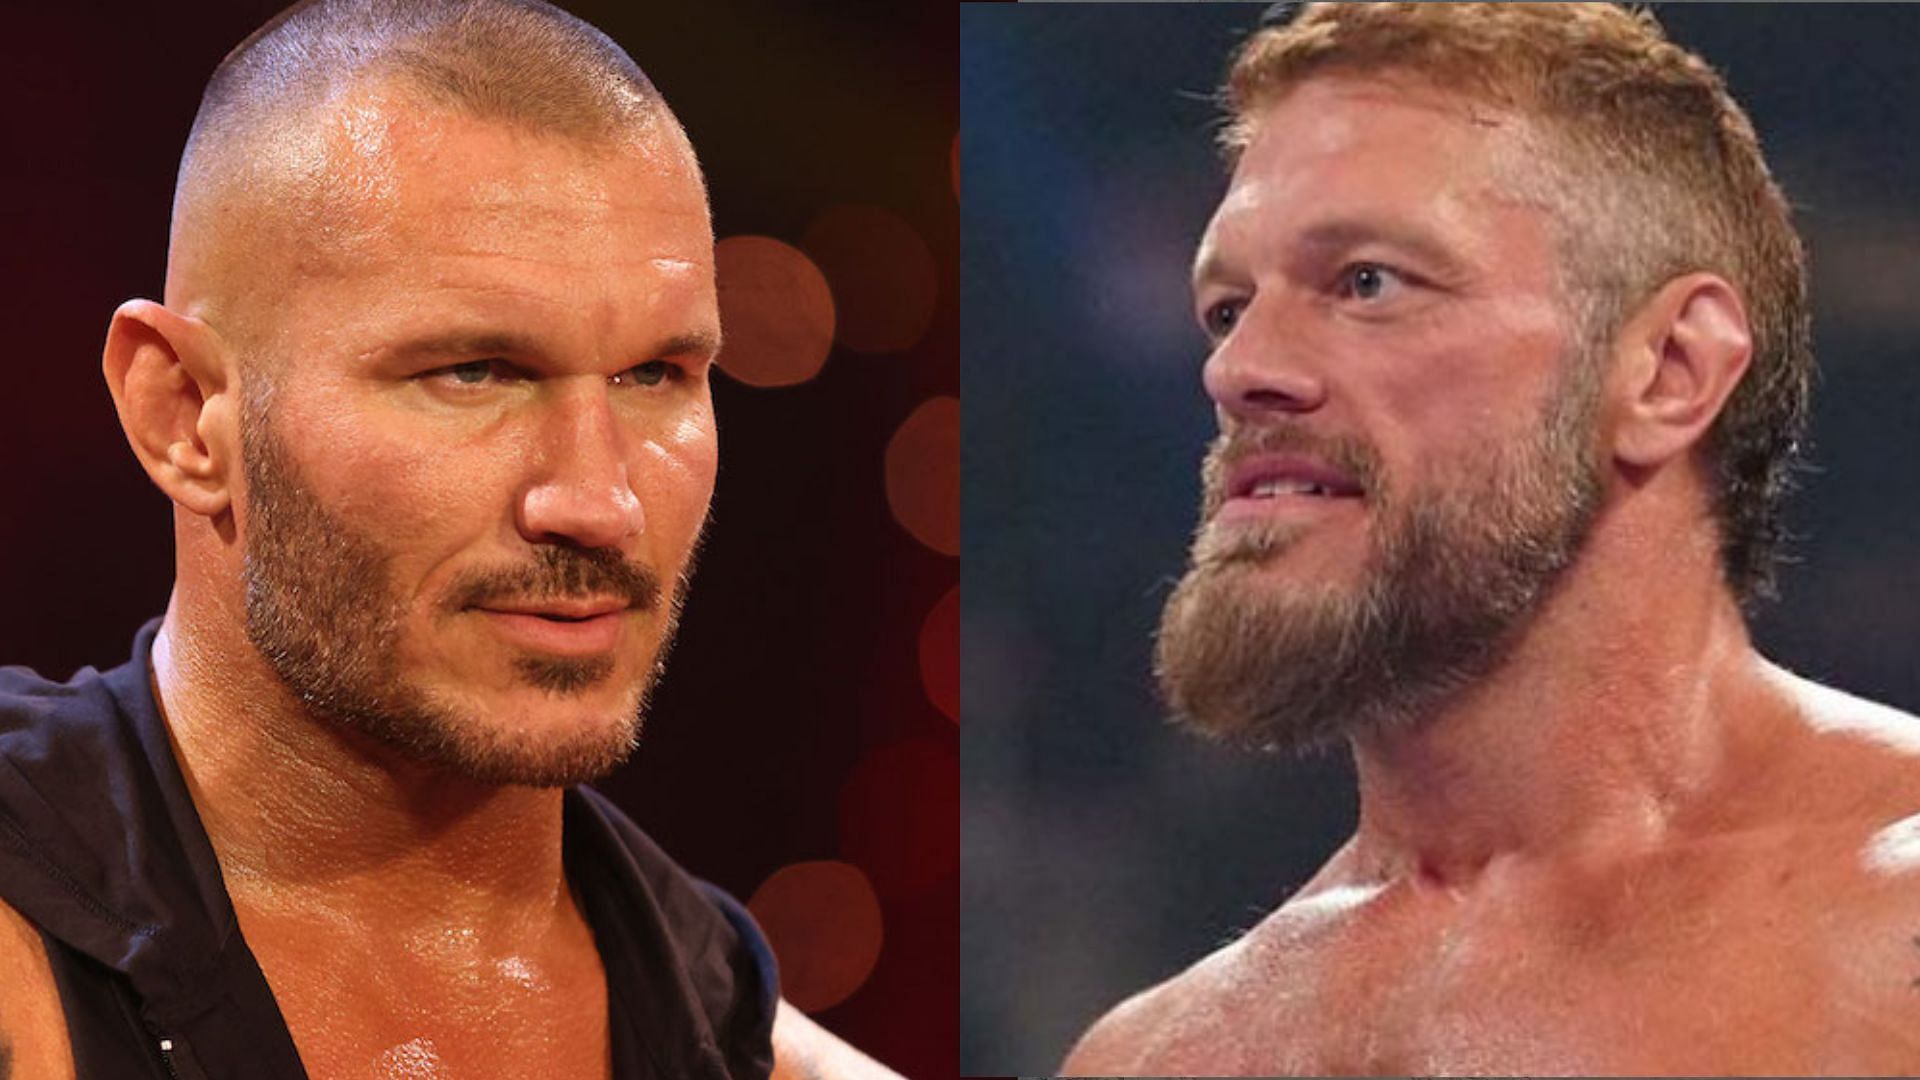 Both Randy Orton and Edge are multi-time WWE Champions